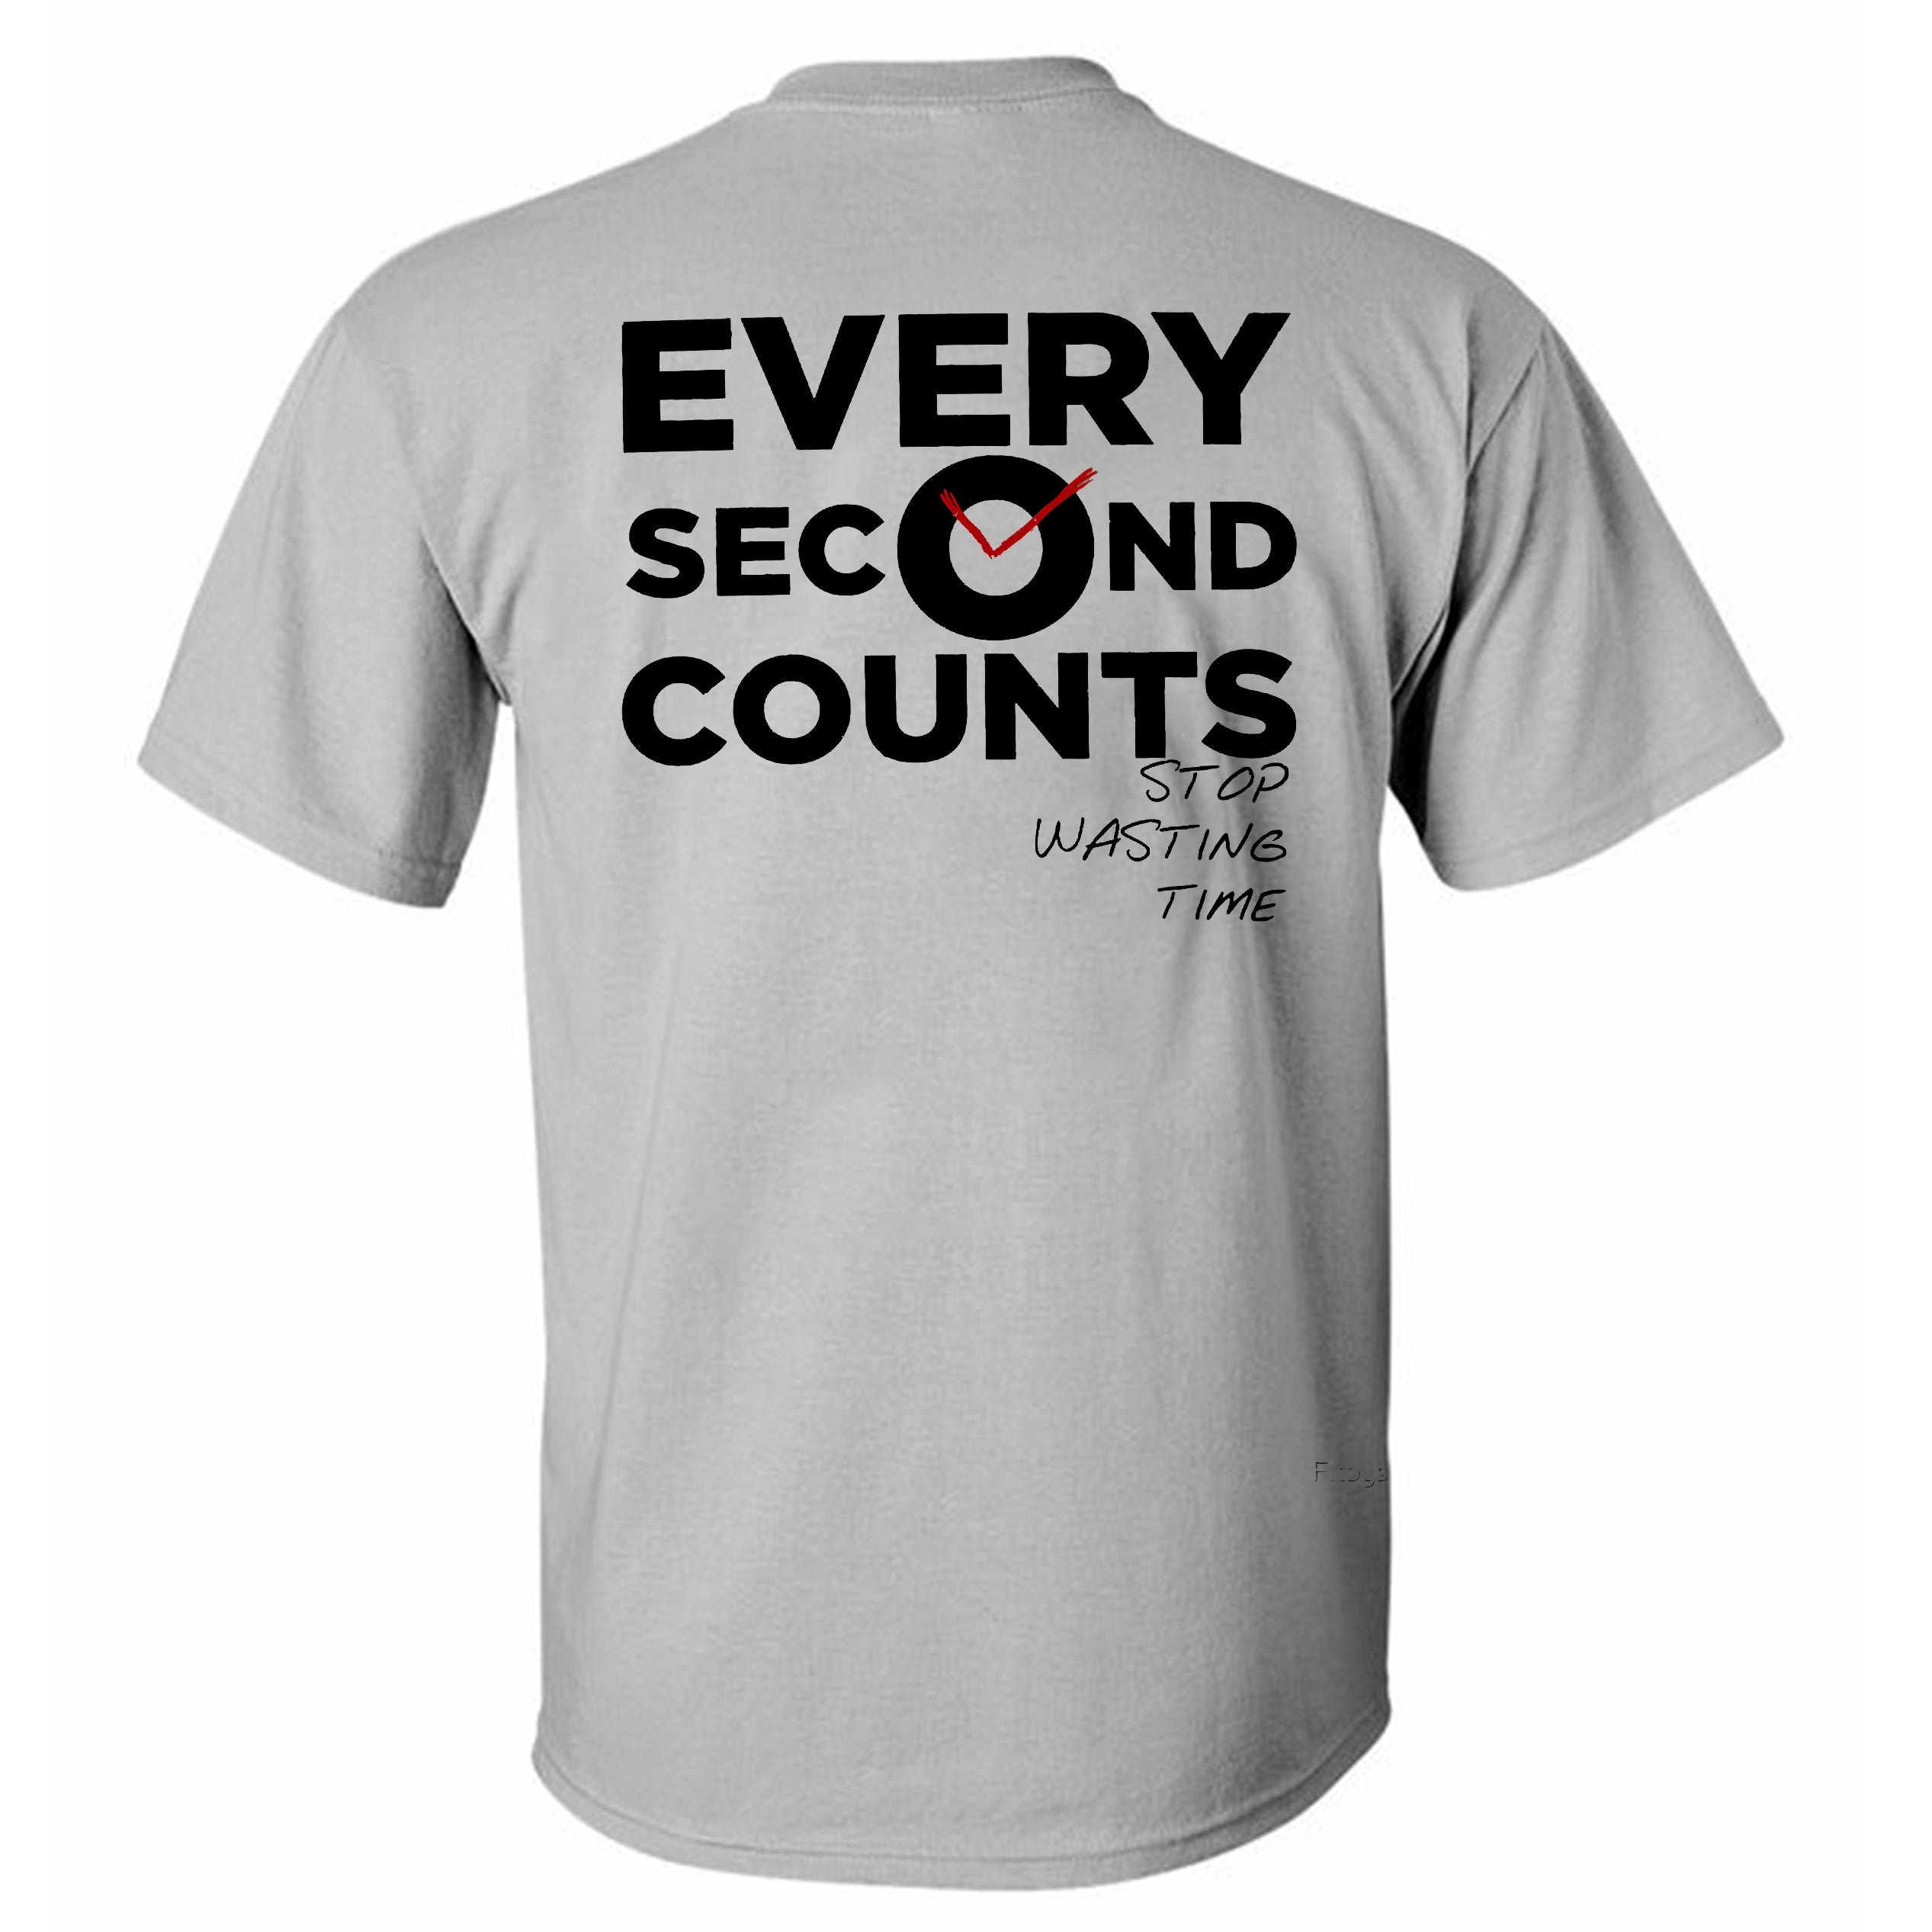 Every Second Counts Stop Wasting Time Printed T-shirt